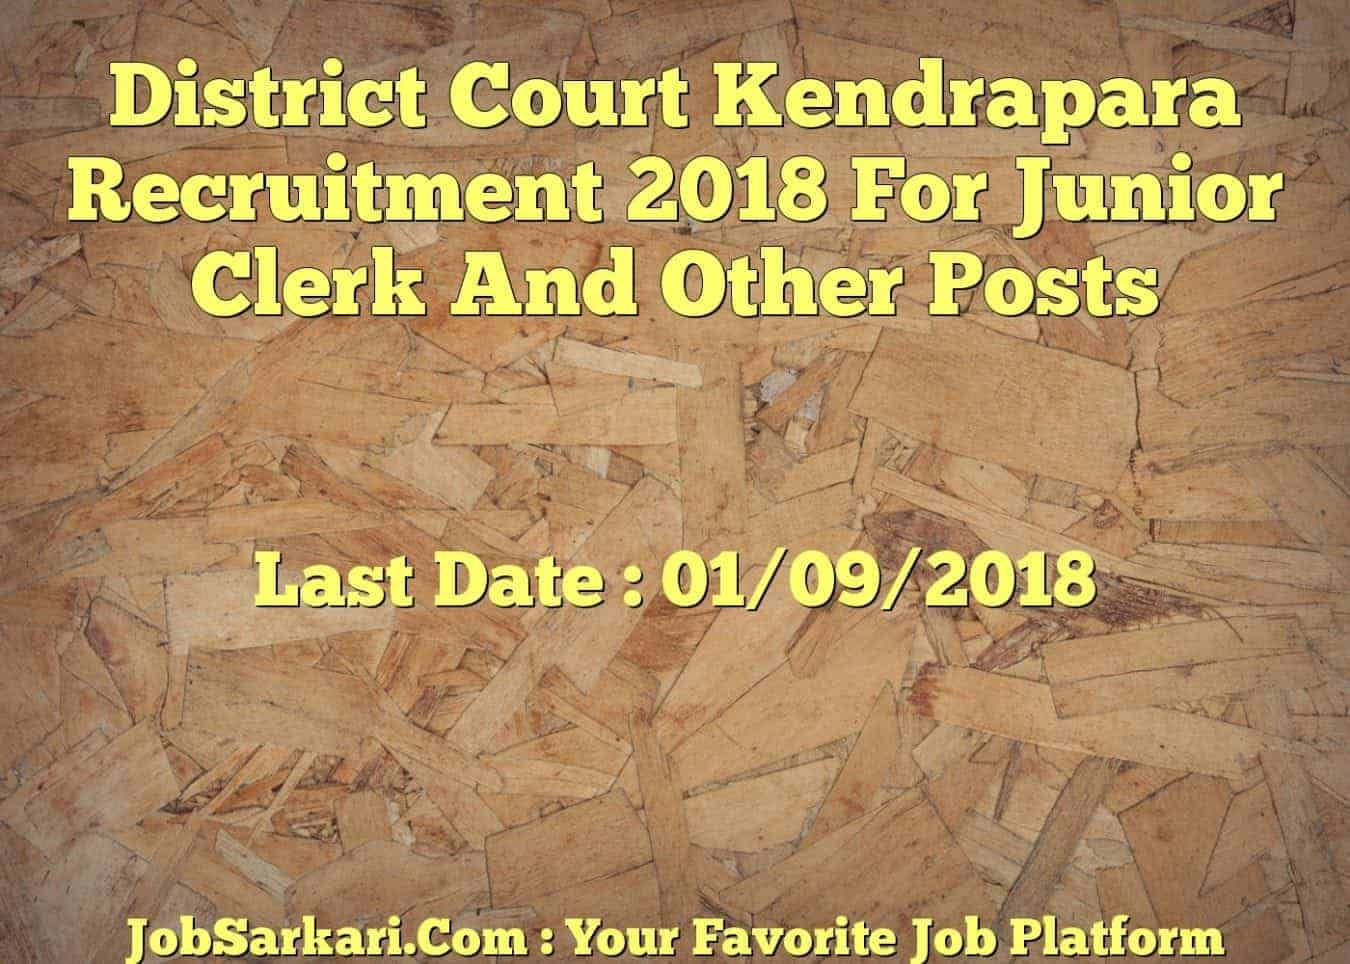 District Court Kendrapara Recruitment 2018 For Junior Clerk And Other Posts